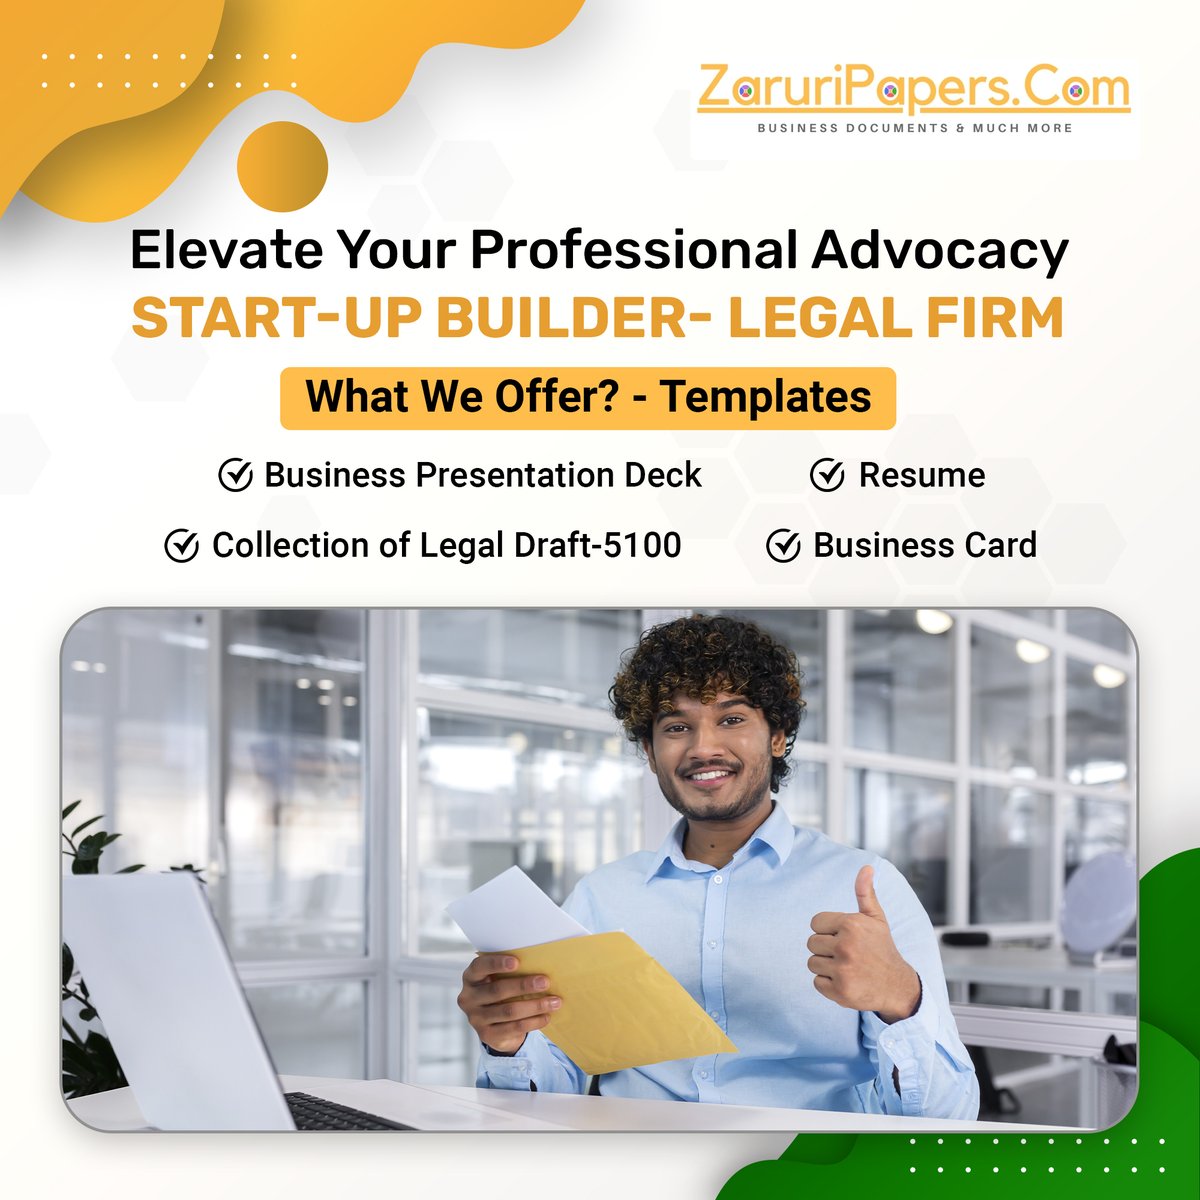 Elevate Your Professional Advocacy with Zaruri Papers! 🌟✒️ Whether You're a Startup Builder or a Legal Firm, Our Tailored Solutions Empower Your Journey to Success. Build Your Foundation Strong, Reach Your Goals Higher! 🏢⚖️

#ZaruriPapers #LegalExcellence #StartupSuccess